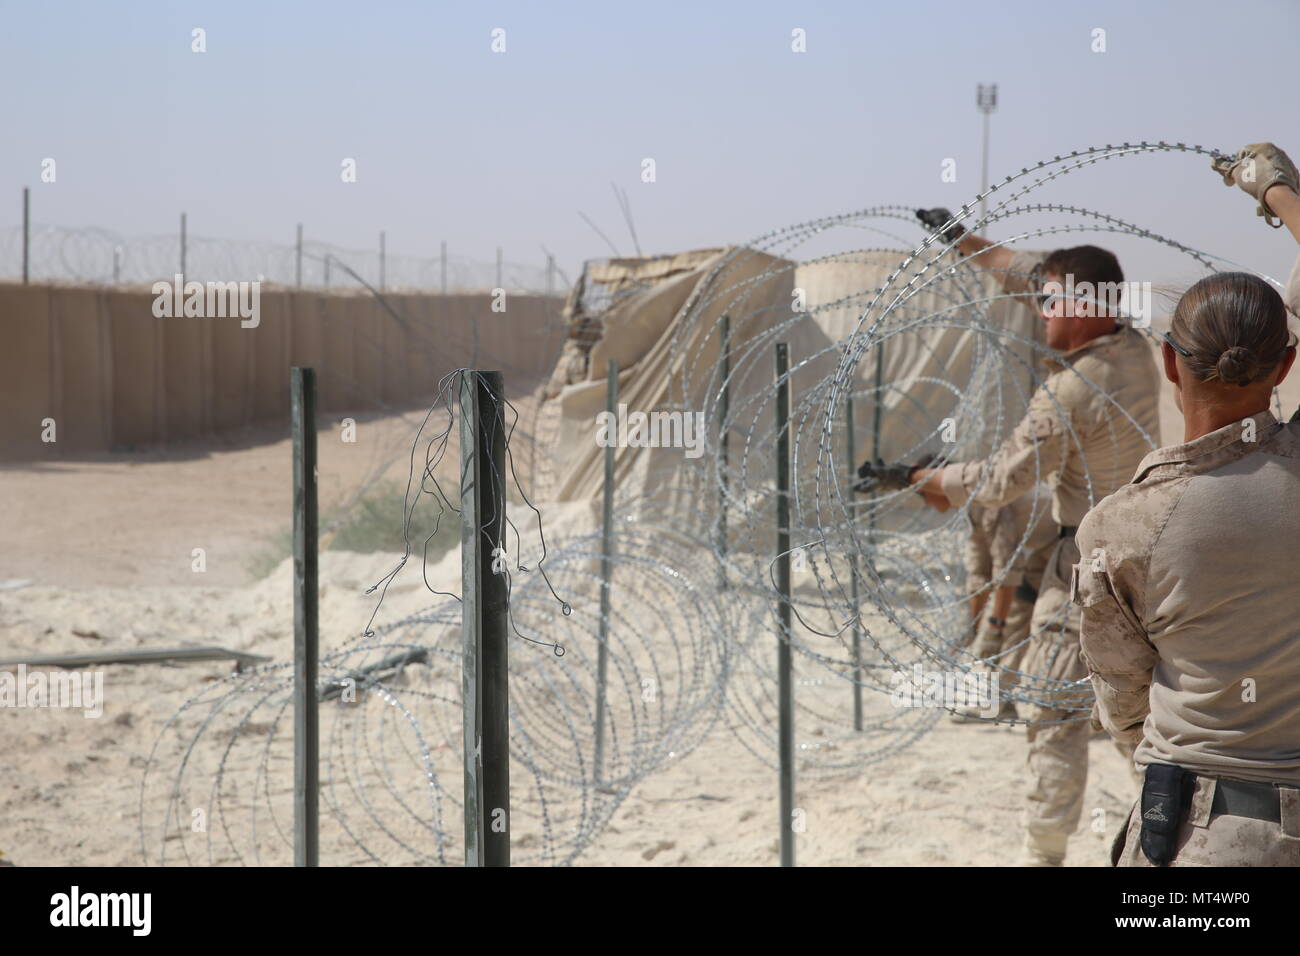 U.S. Marine Corps Cpl. Bridget Bastian and Lance Cpl. Jonathan Fer, both combat engineers attached to Task Force Al Asad with Marine Wing Support Squadron (MWSS) 372 ,Special Purpose Marine Air-Ground Task Force-Crisis Response-Central Command, improve force protection measures by laying concertina wire at Al Asad Air Base, Iraq, July 6, 2017. The Marines of the Engineering Detachment work daily on a variety of engineer tasks in support of the master base plan for Task Force Al Asad. Task Force Al Asad’s mission is to advise and assist  and build partner capacity with the Iraqi Security Forces Stock Photo